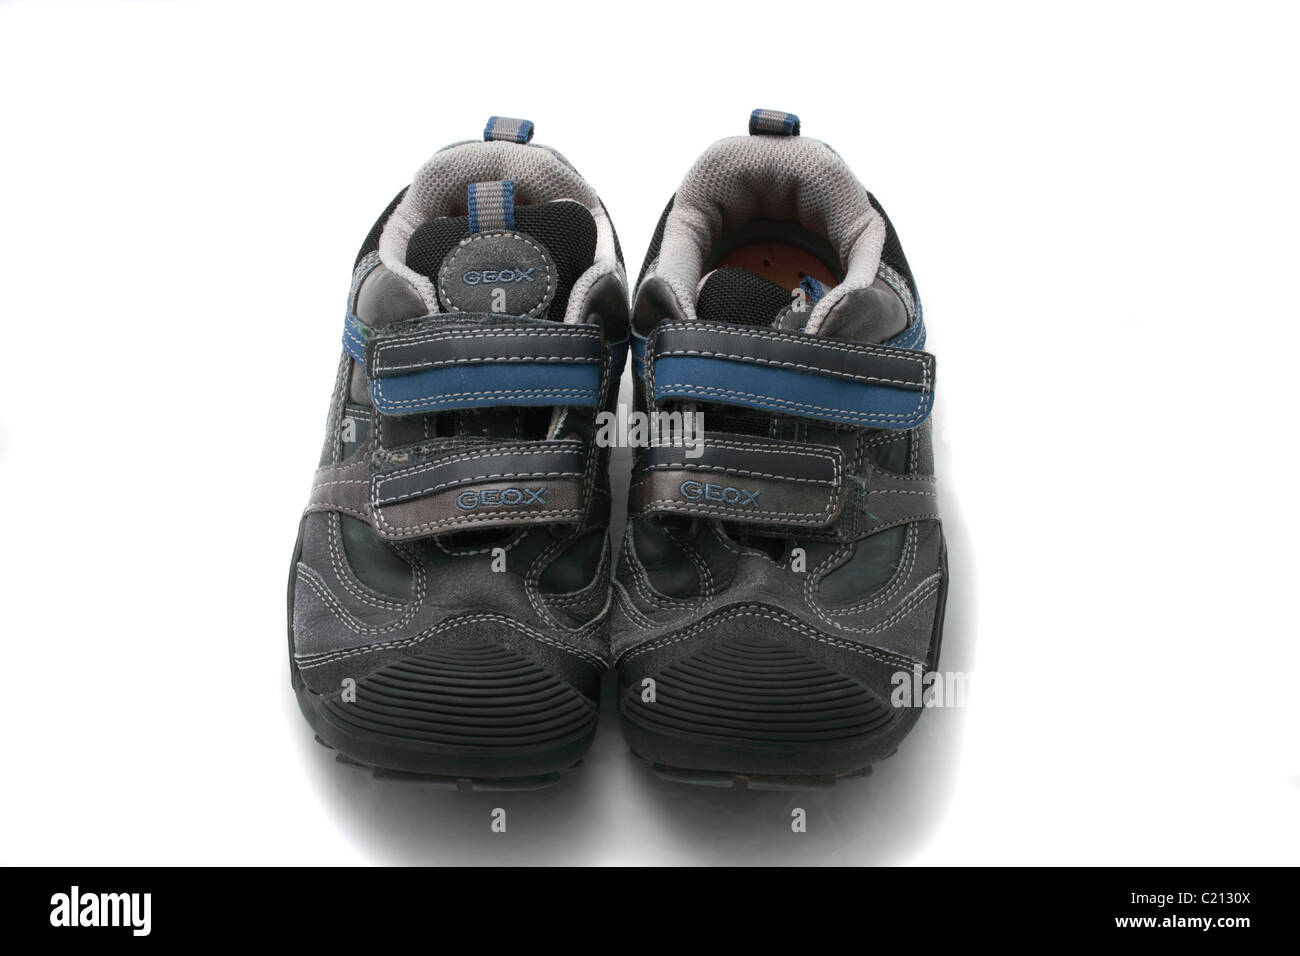 Geox Respira childs training shoes Geobuck and oiled suede, grey and sky  blue size 33 (UK size 1 Stock Photo - Alamy